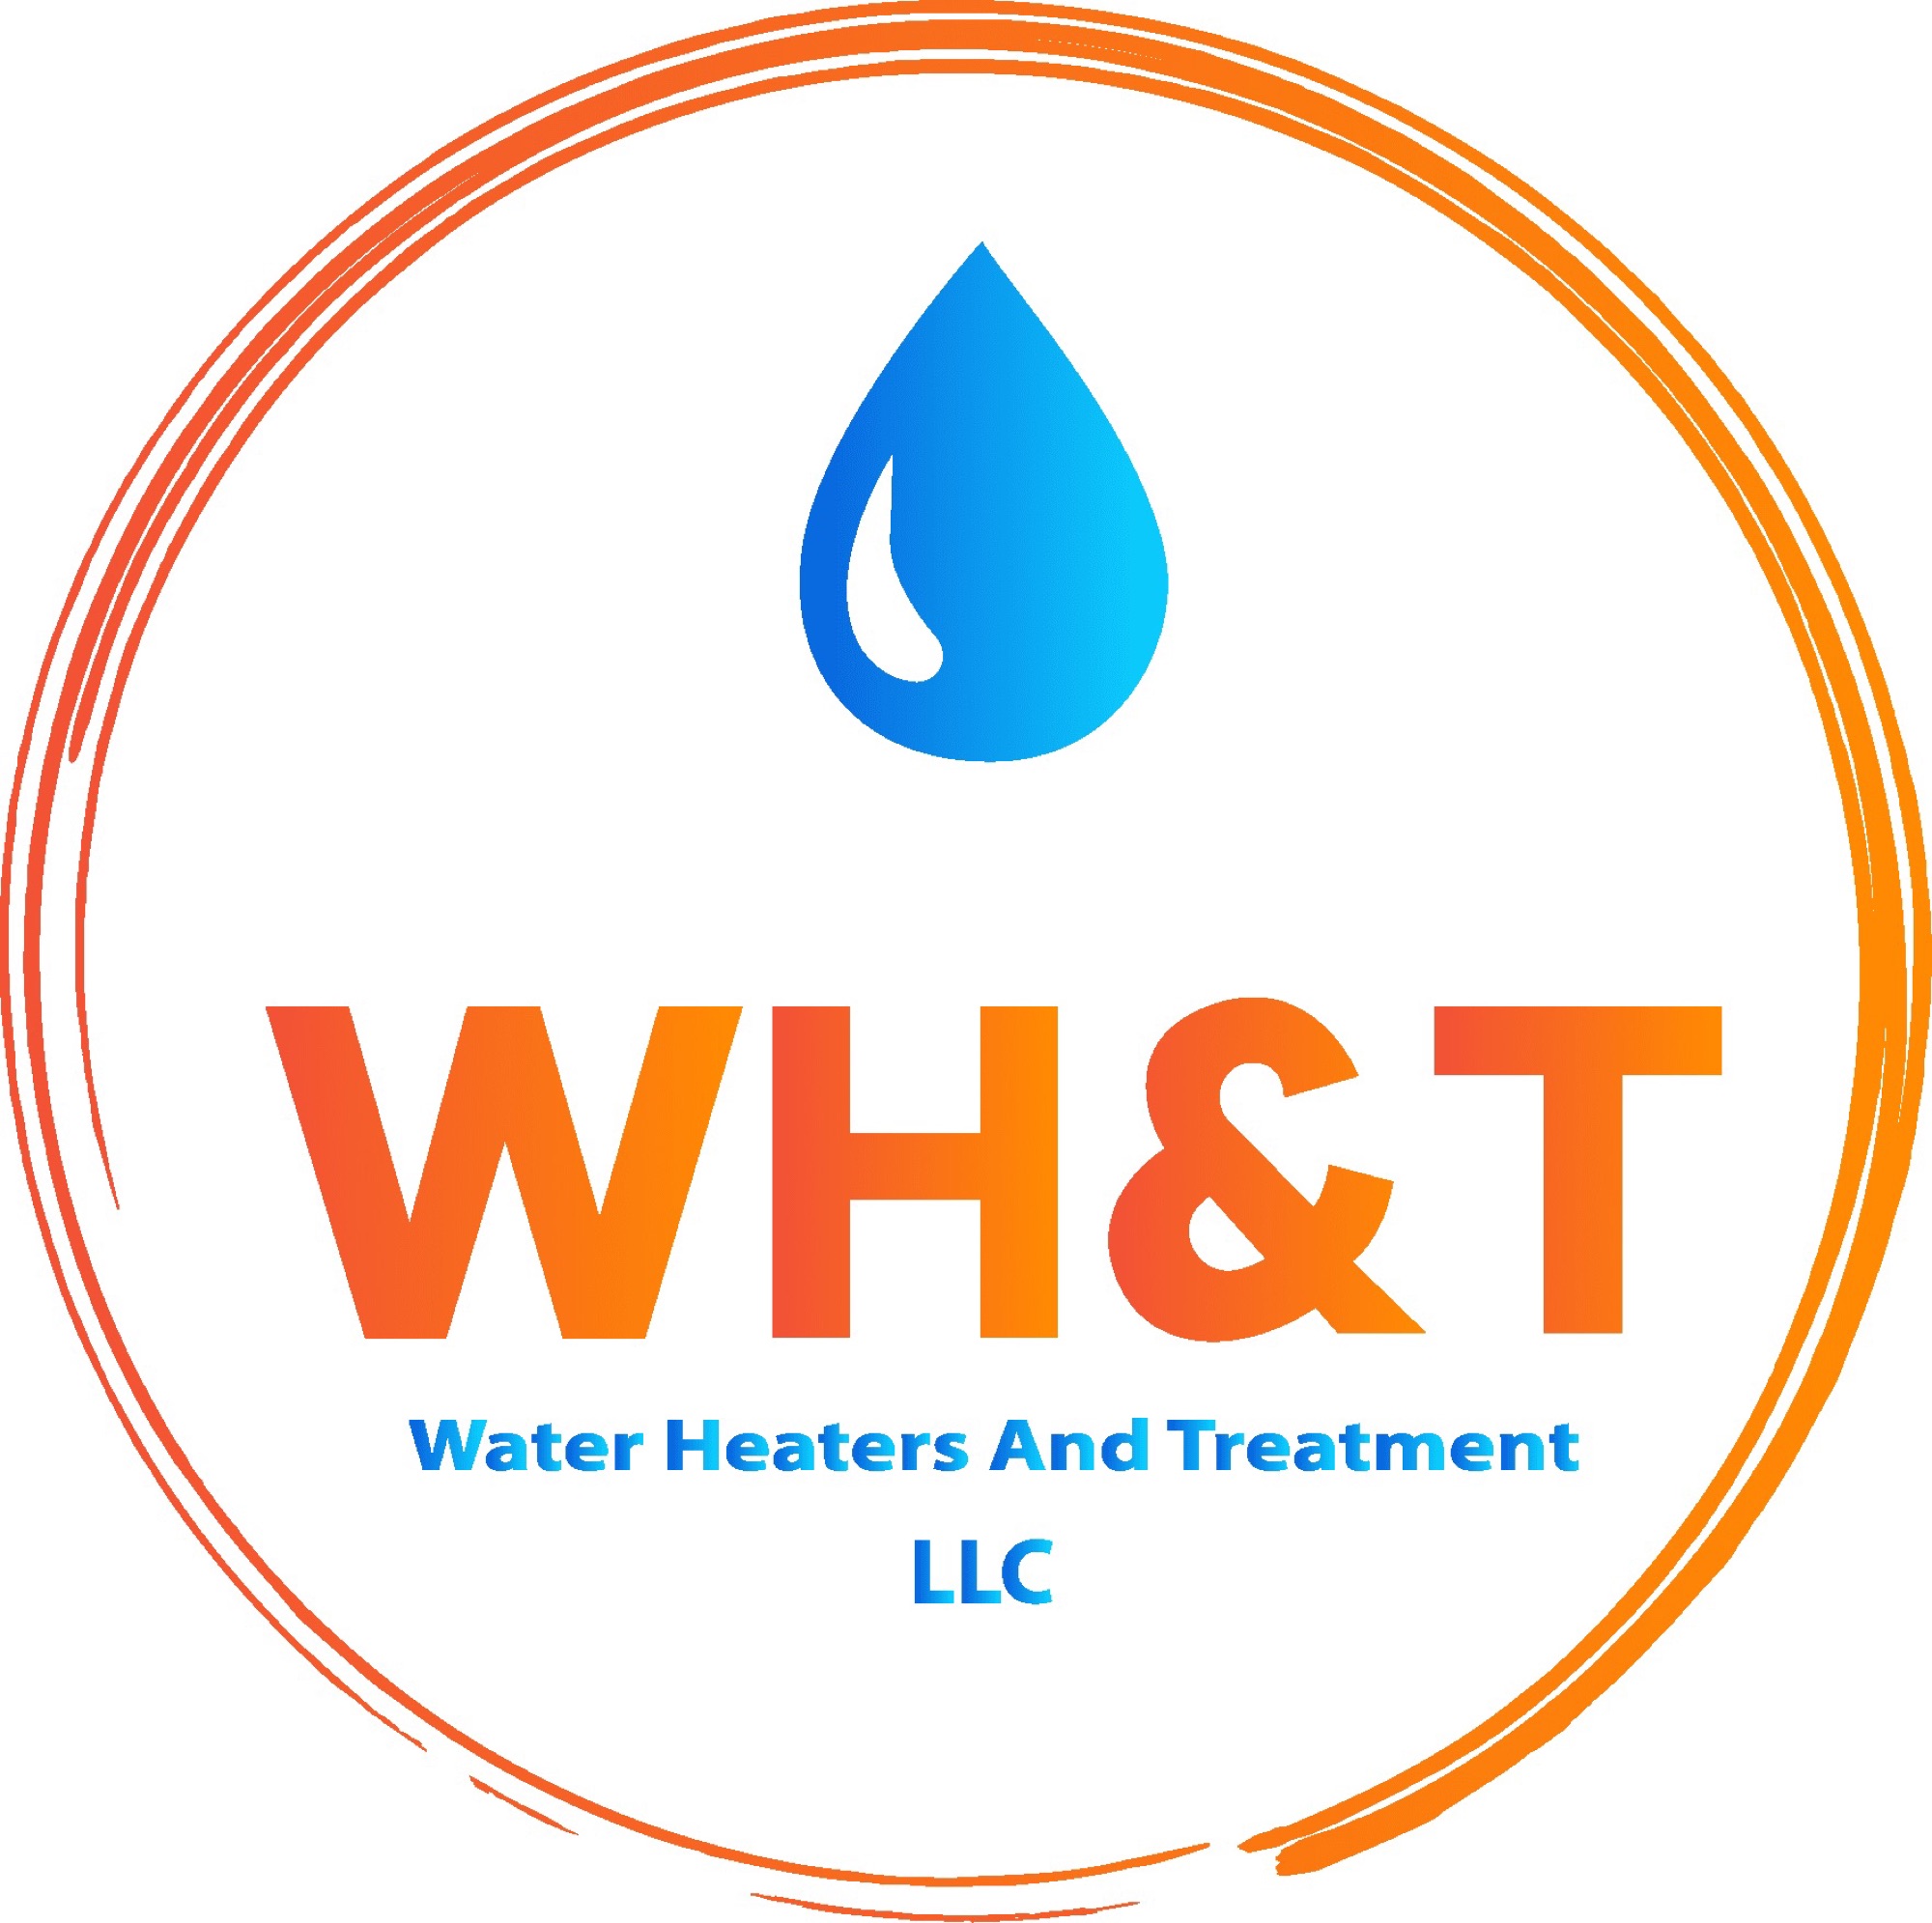 Water Heaters and Treatment, LLC Logo